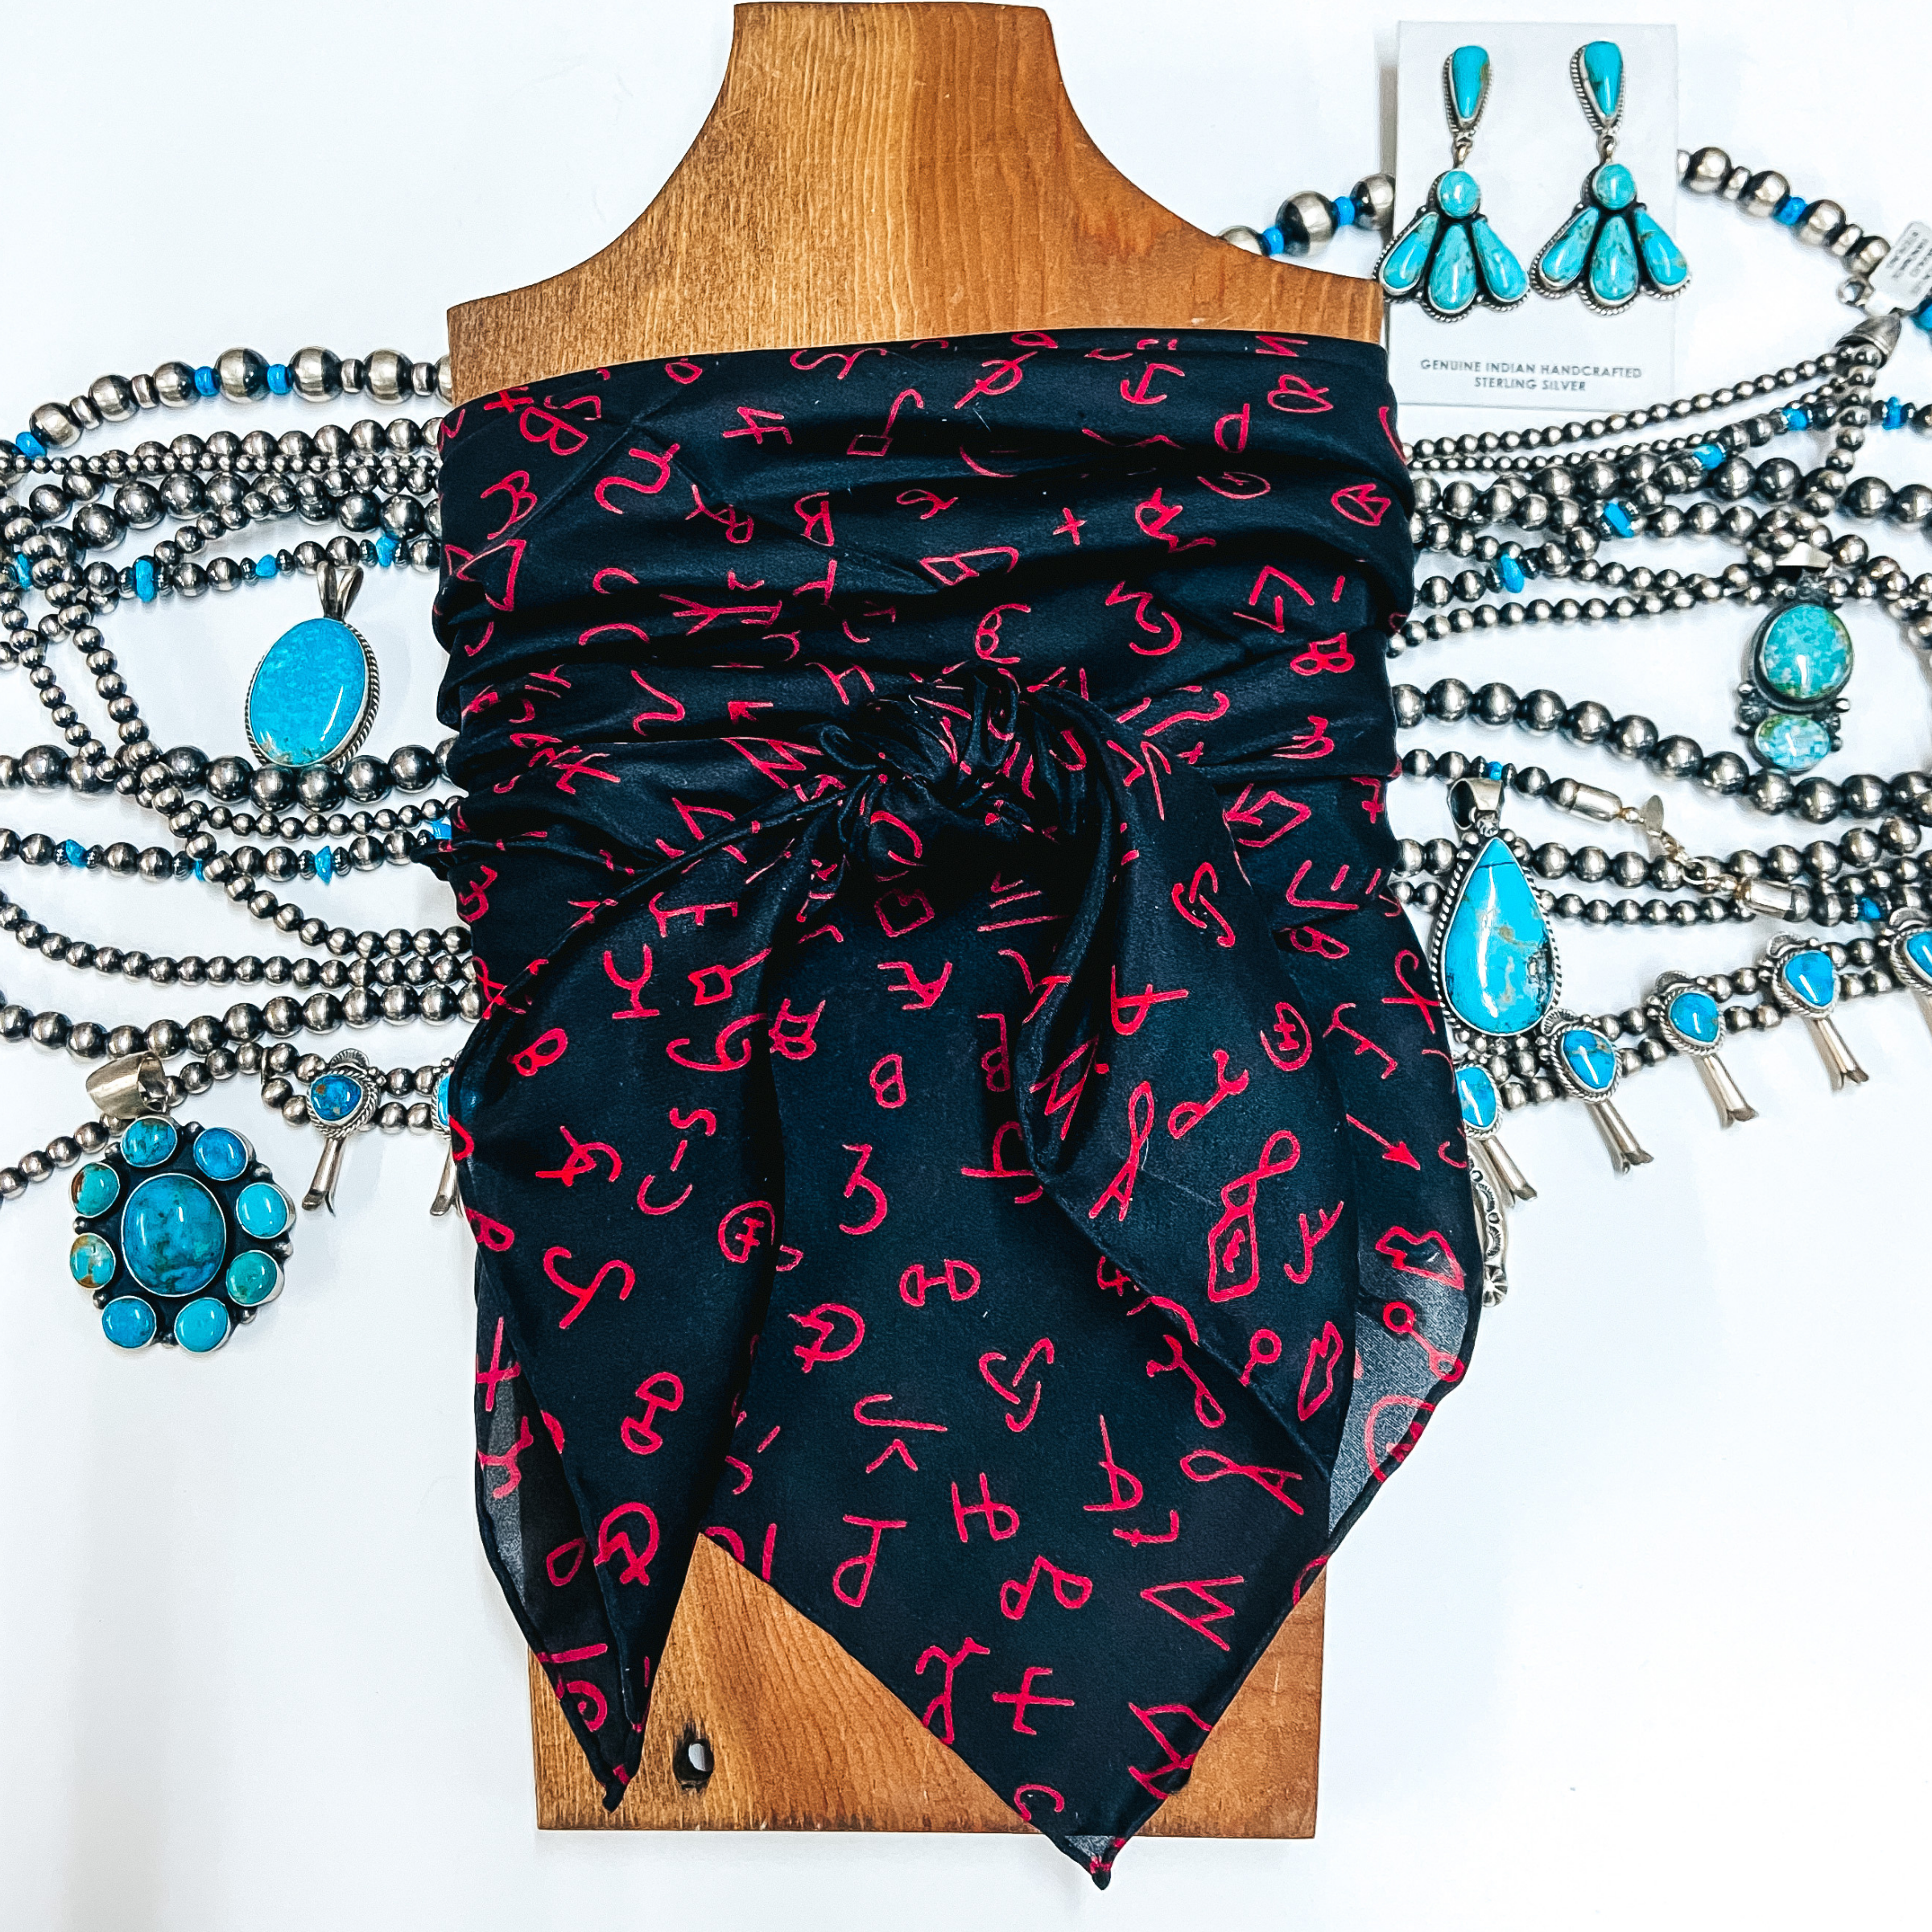 A silky scarf with branded patterns tied on a wooden display. Pictured on white background with turquoise and silver jewelry.